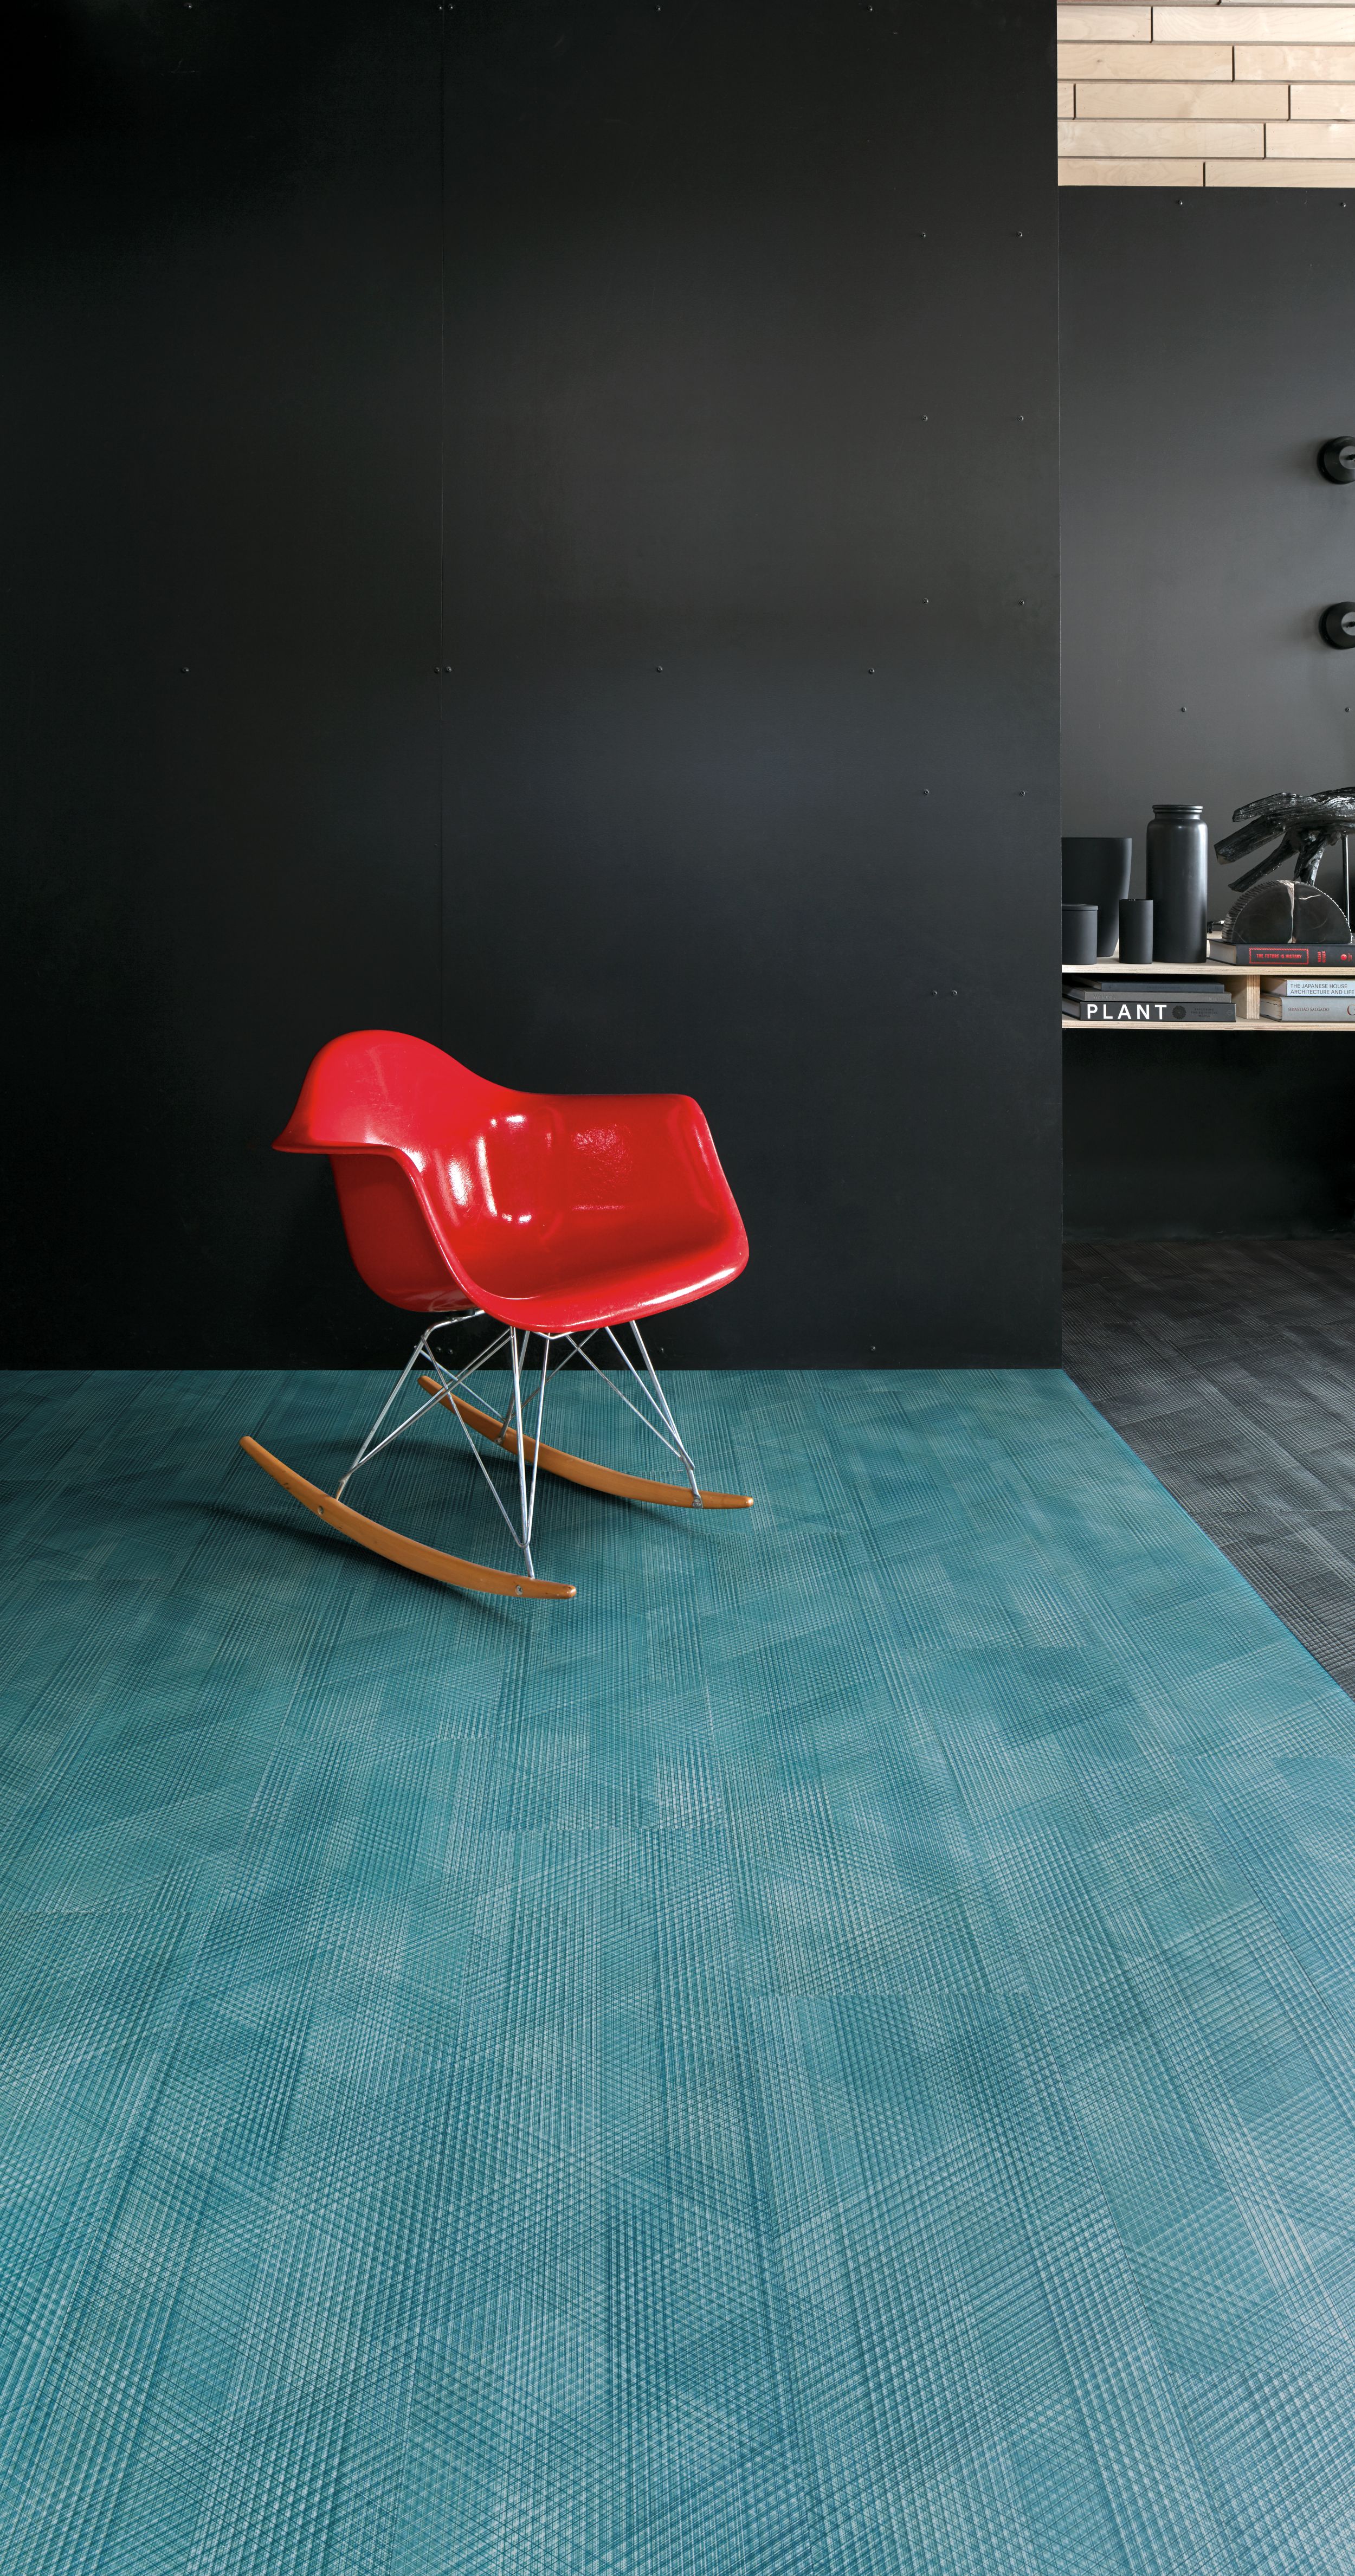 Interface Drawn Lines LVT in common area with red rocking chair  imagen número 4